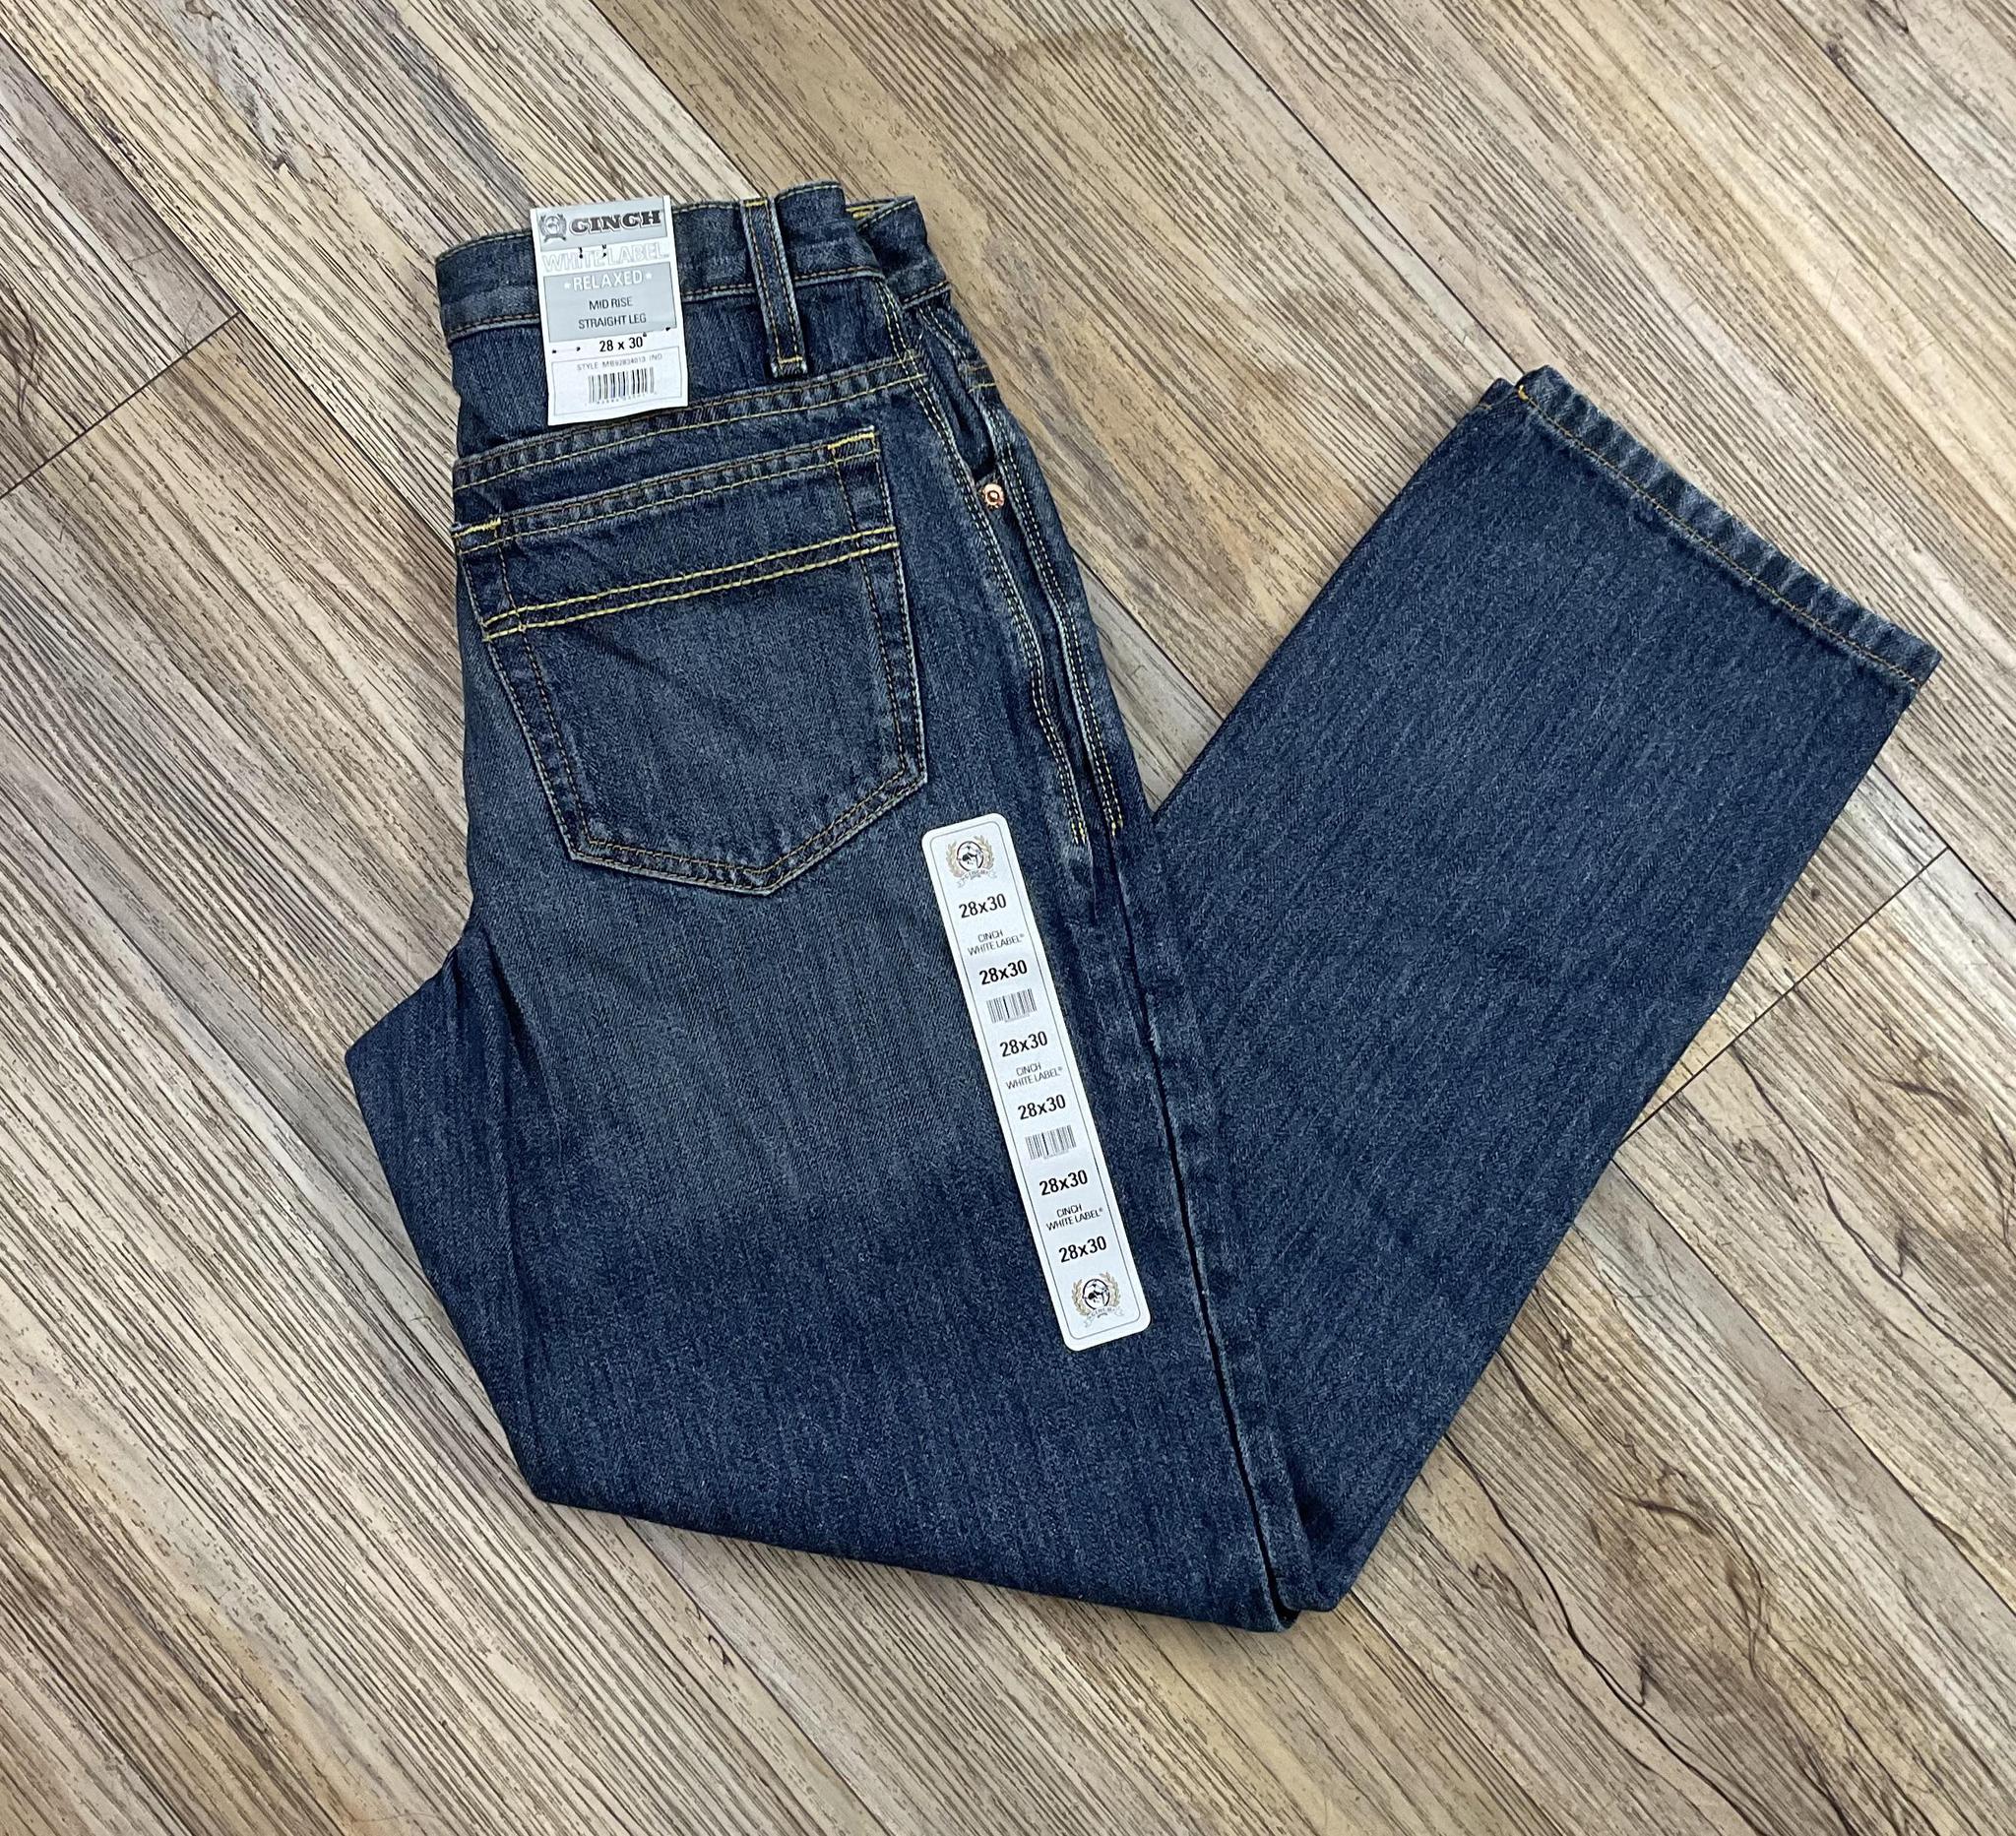 Cinch White Label Relaxed Fit Mid Rise Jeans Dark Stonewash